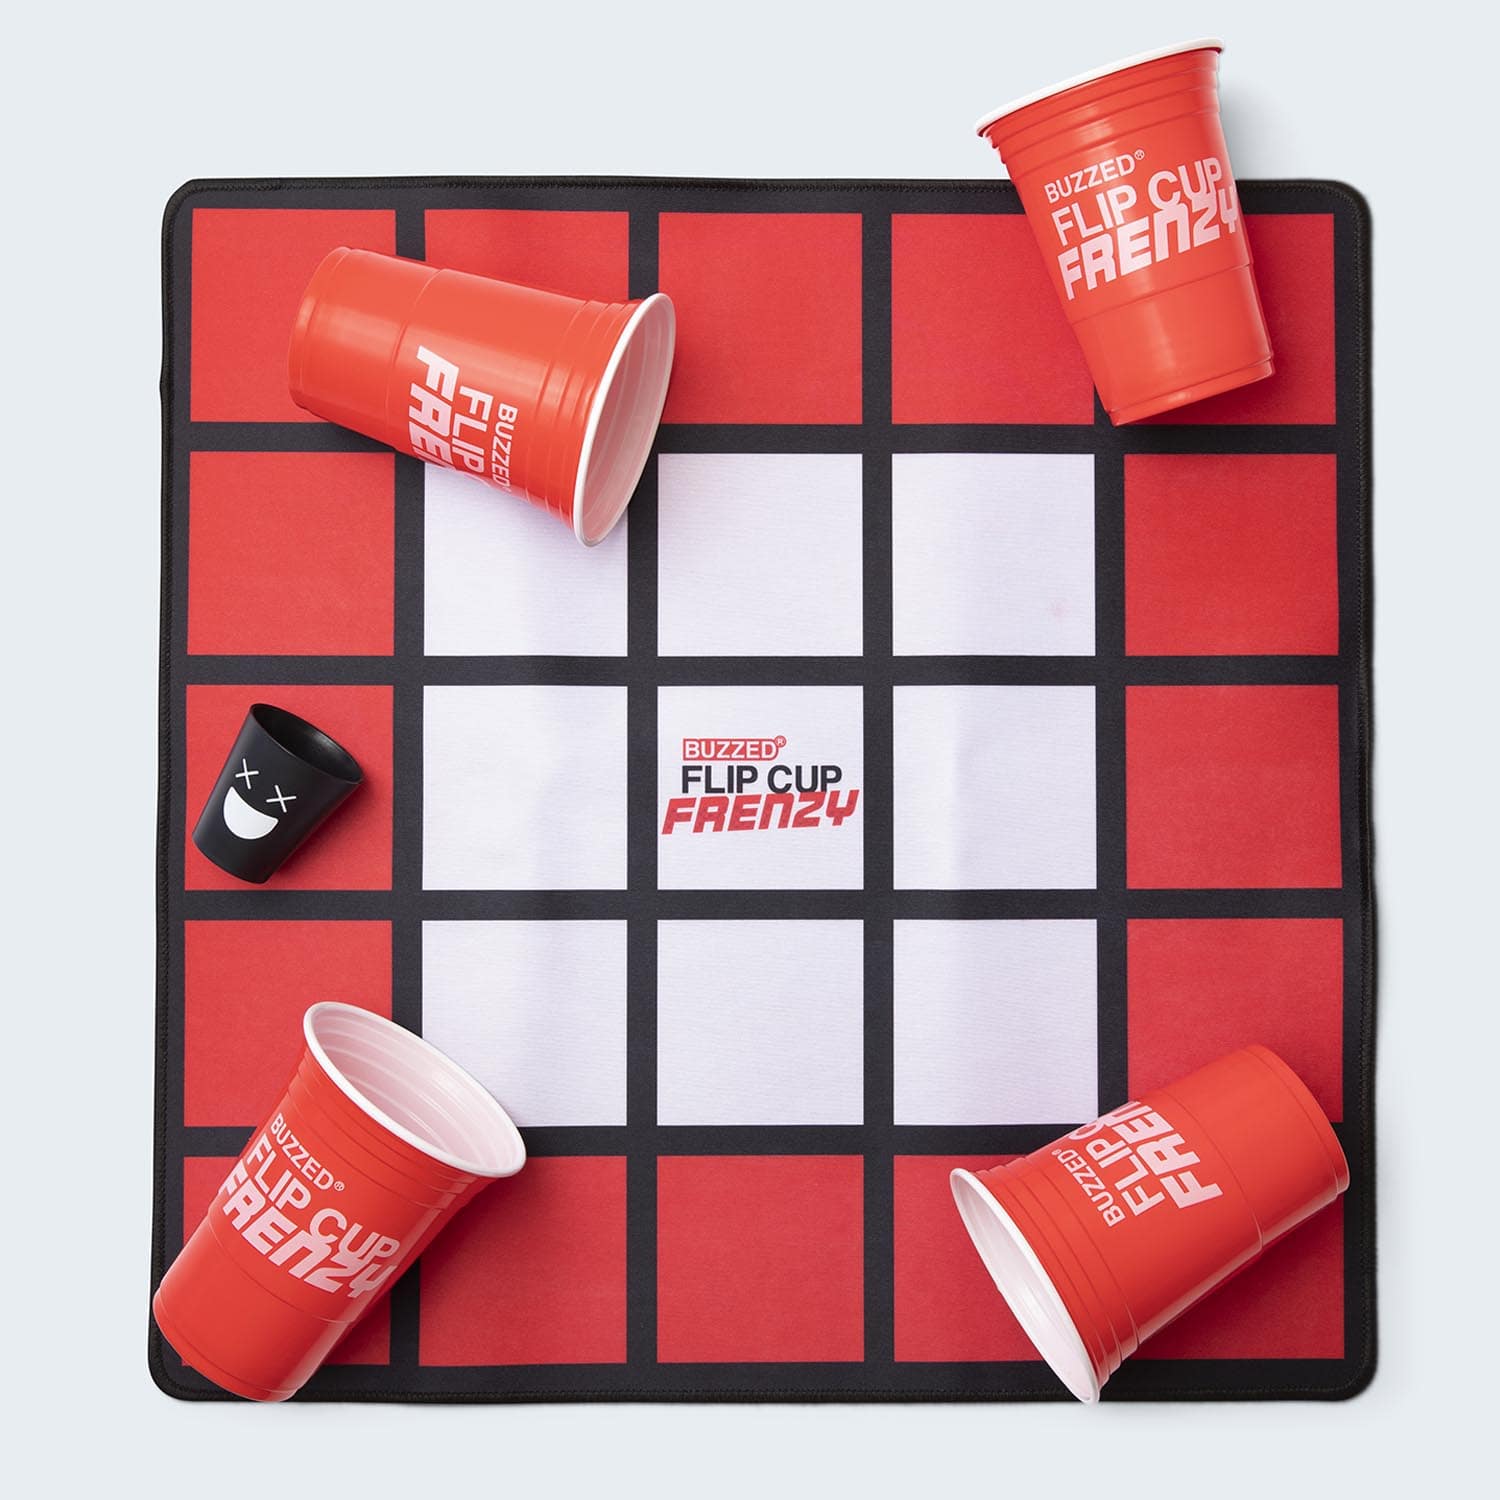 buzzed-flip-cup-frenzy-game-box-and-game-play-04-what-do-you-meme-by-relatable